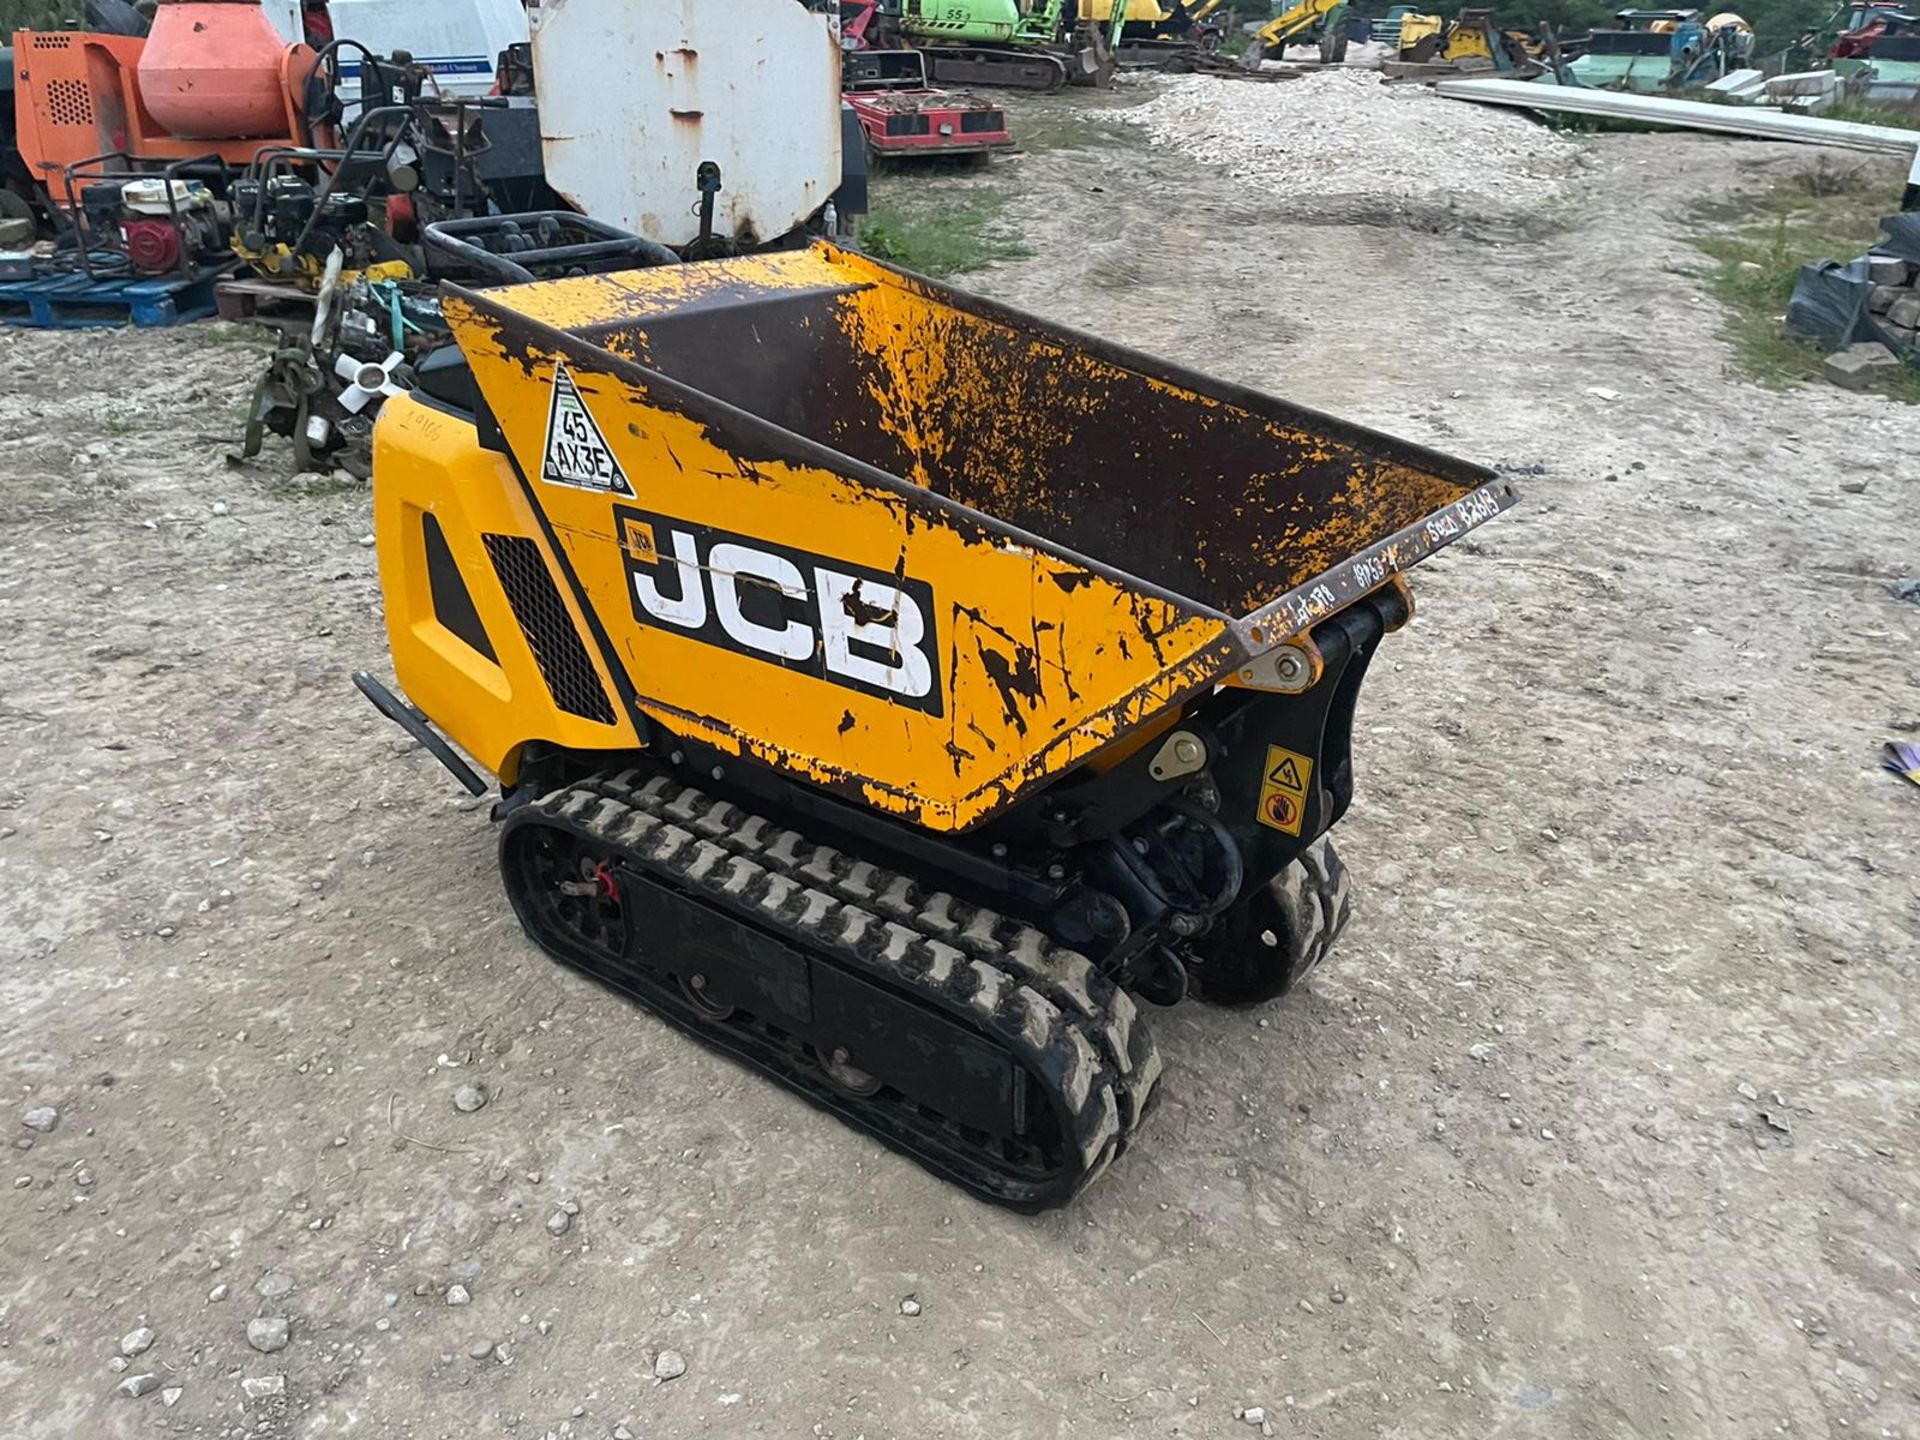 2019 JCB HTD-5 DIESEL TRACKED DUMPER, RUNS DRIVES AND DUMPS, 2 SPEED TRACKING, ELECTRIC START - Image 2 of 13